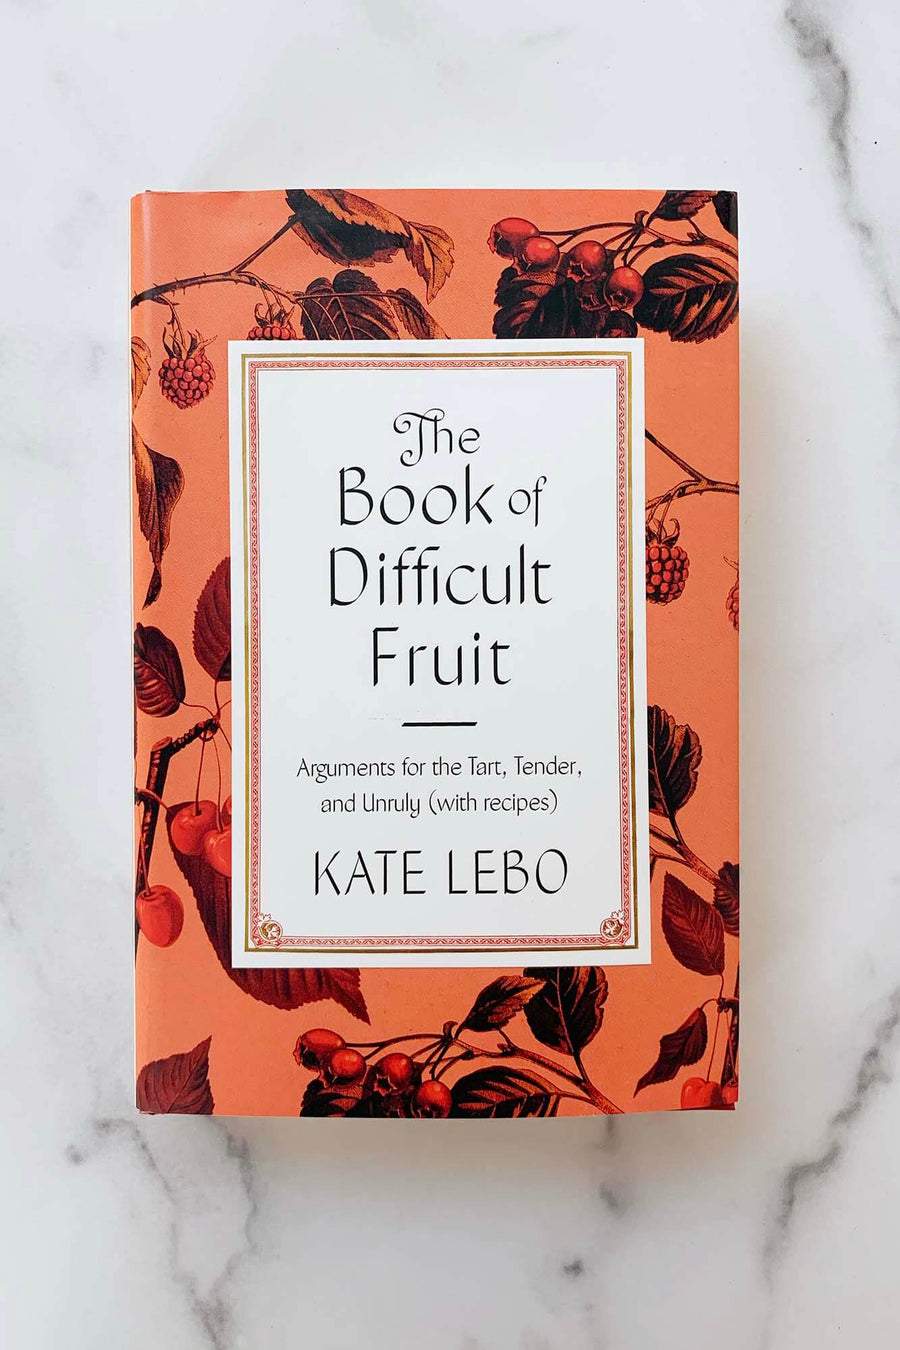 The Book of Difficult Fruit